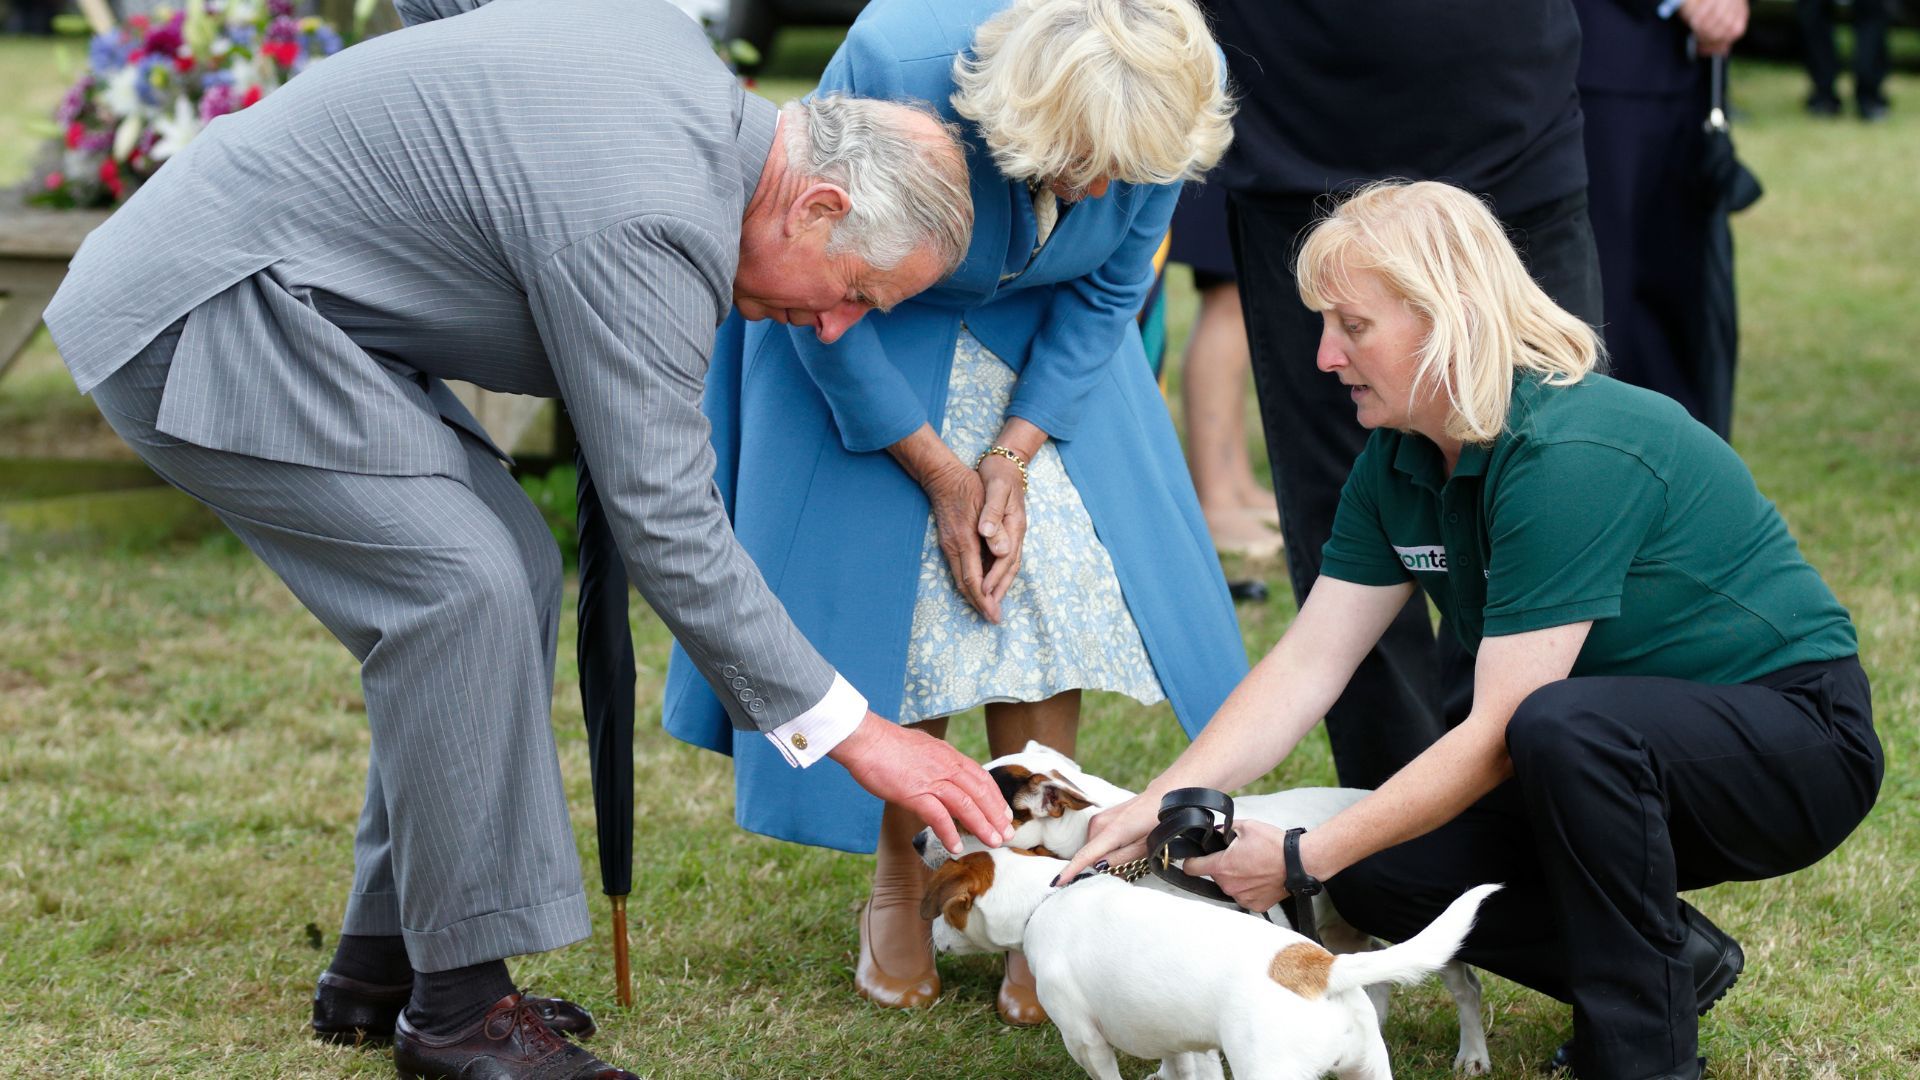 <p>                     King Charles certainly takes after his mother's love of dogs, with Queen Elizabeth II having over 30 dog companions over her reign. Charles and Camilla have two adorable Jack Russell Terrier crosses, their names are Beth and Bluebell, Camilla has adopted both dogs from Battersea Dogs and Cats Home, a charity she works closely with.                   </p>